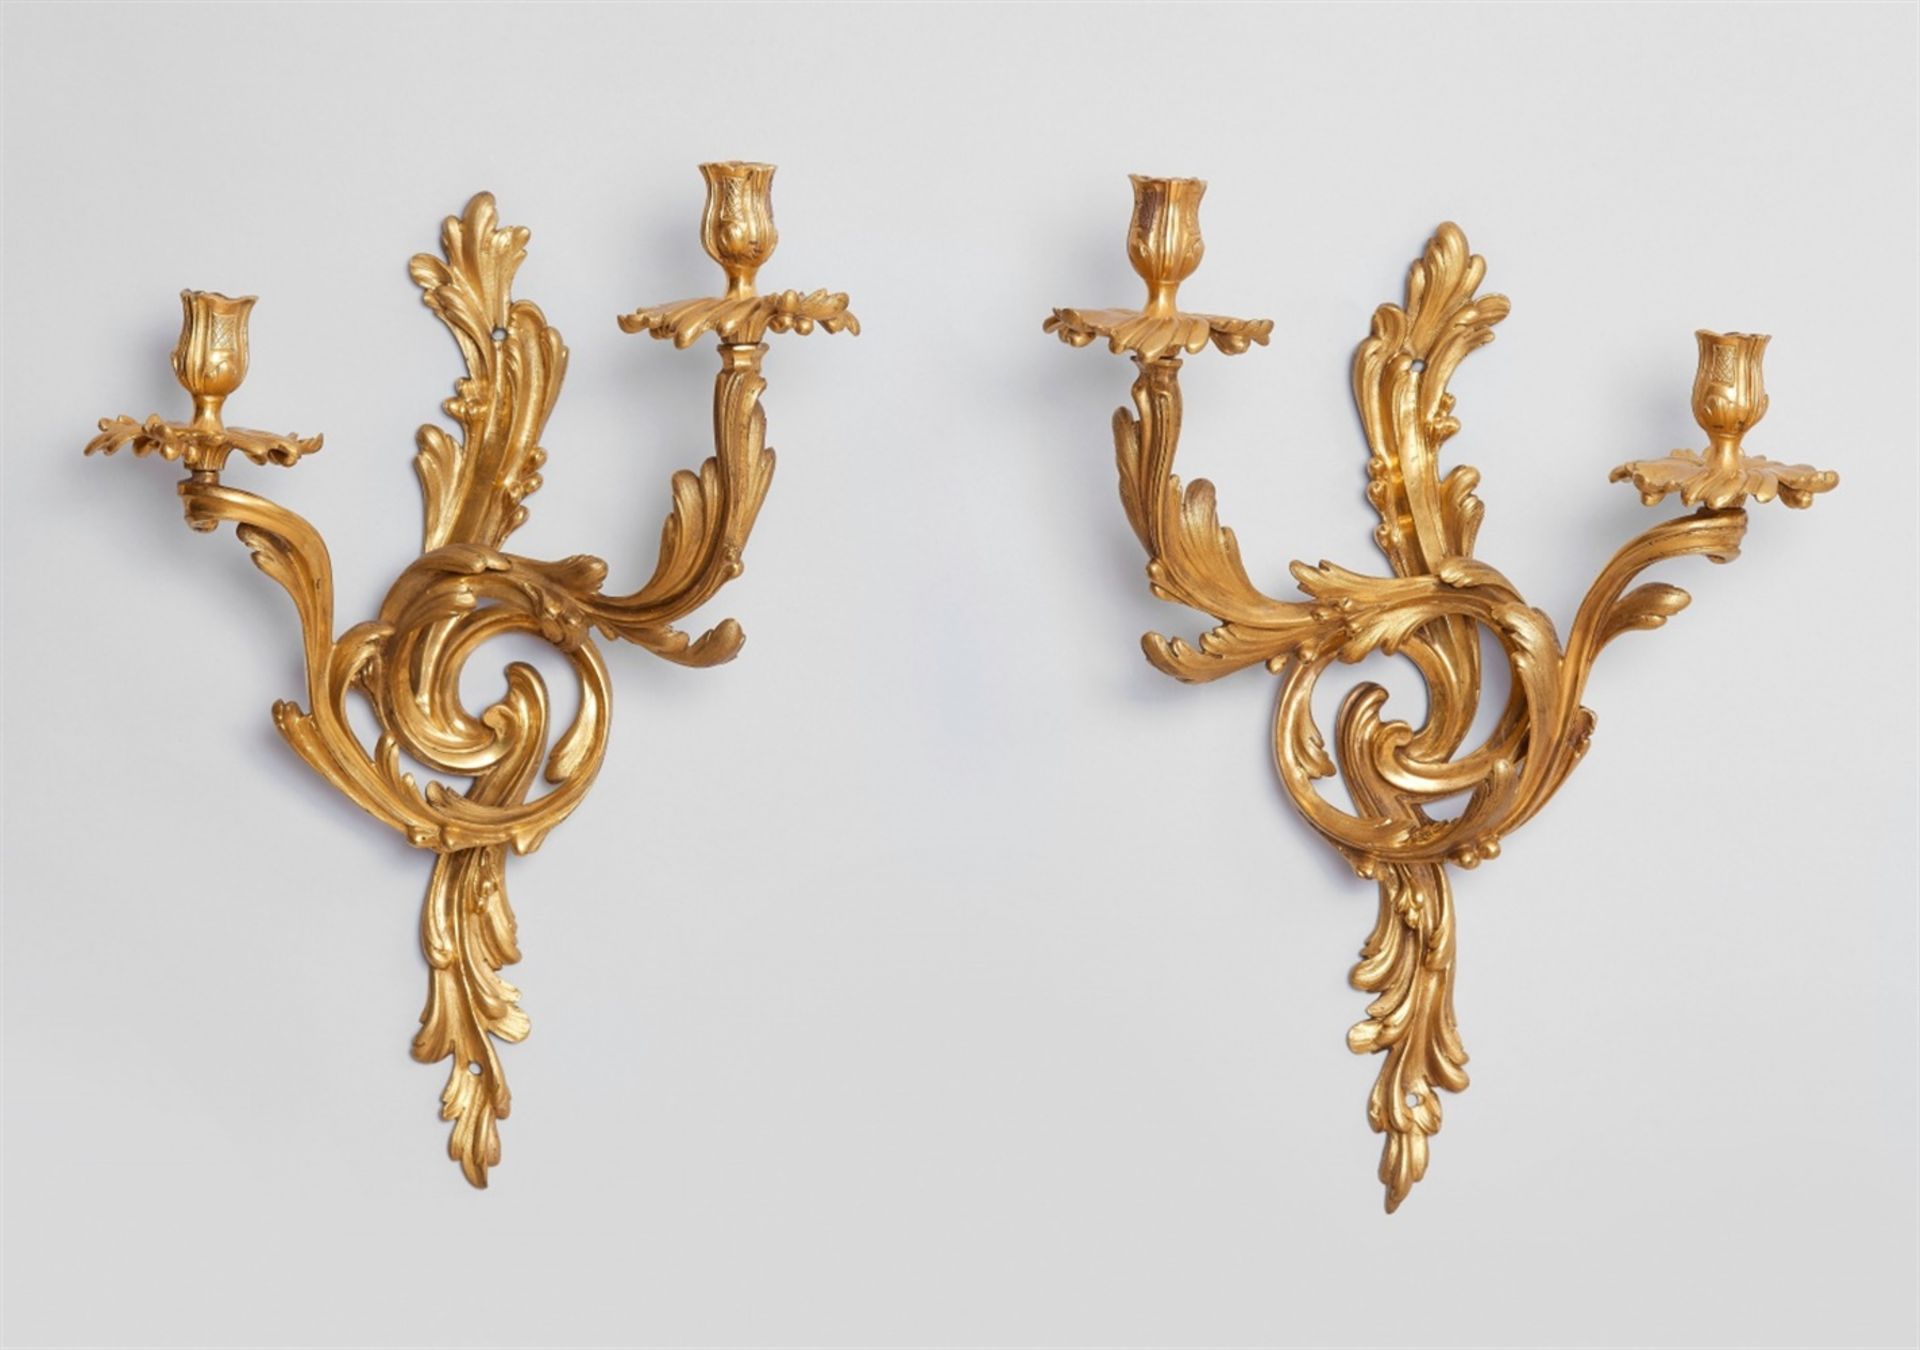 A pair of Louis XV ormolu appliquesTwo-flame fire-gilt bronze appliques cast in several pieces and